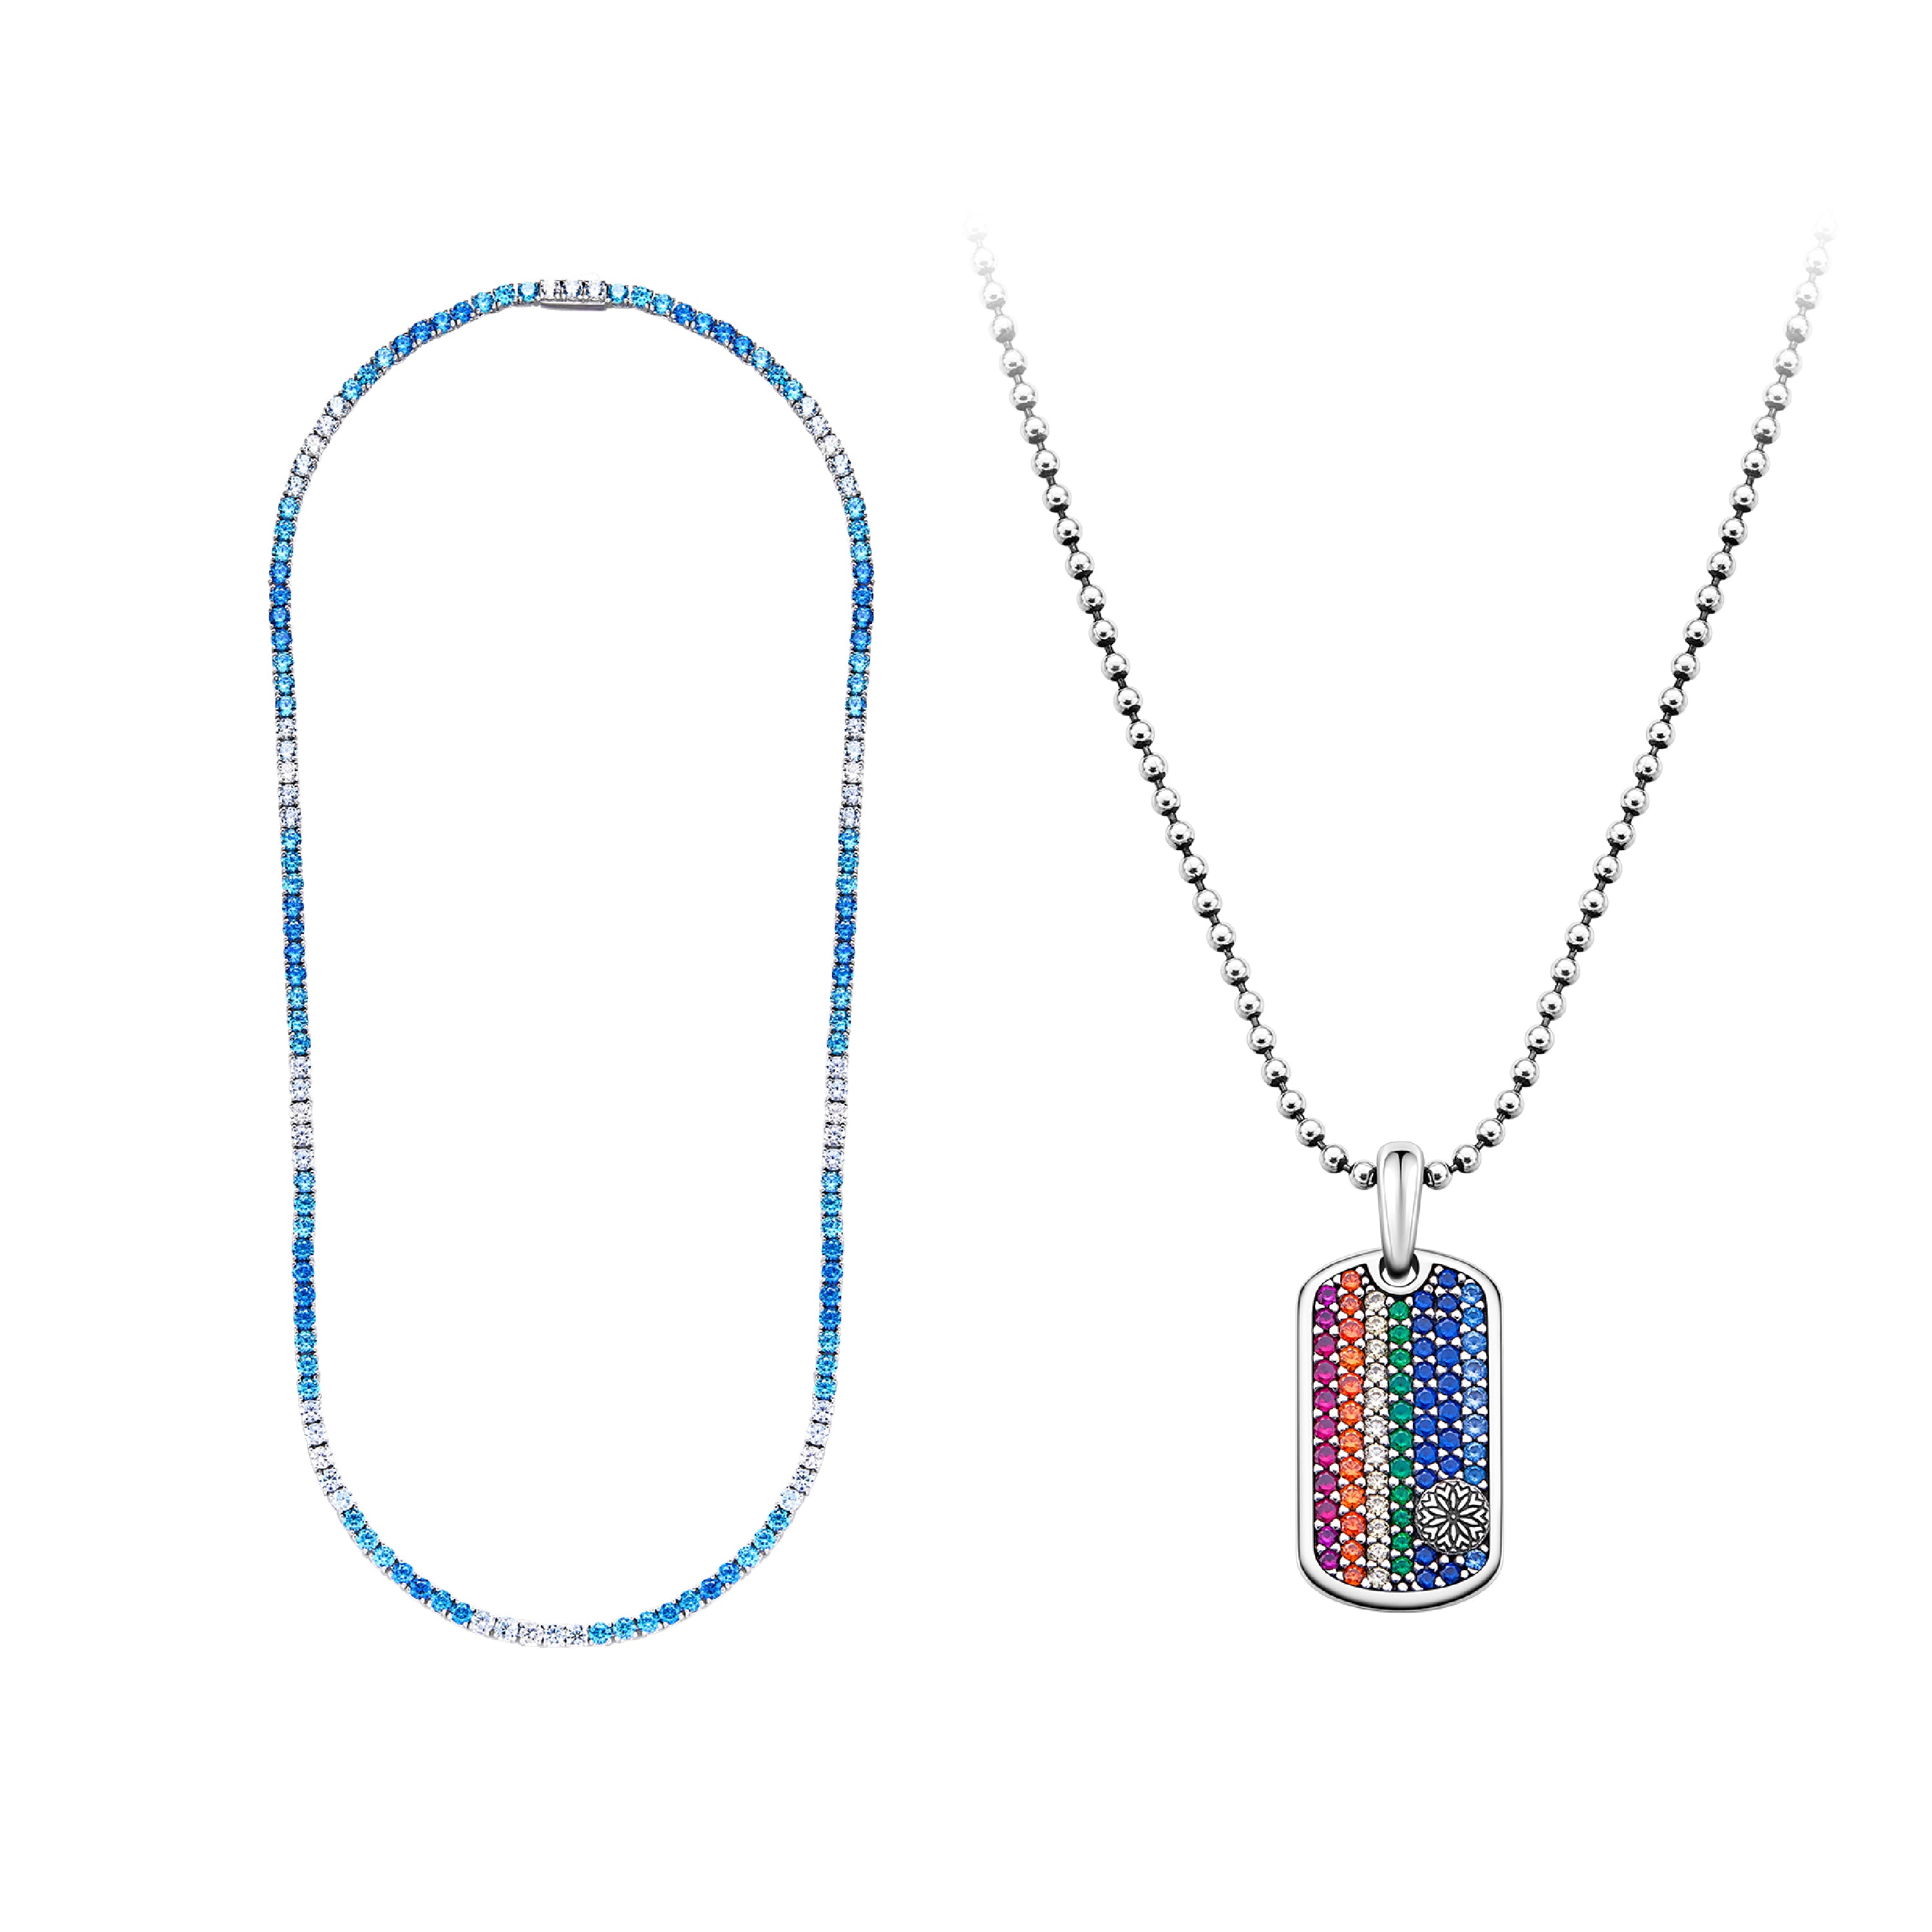 BLUE BRAVE TENNIS NECKLACE & RAINBOW CHERRY BLOSSOM TAG NECKLACE